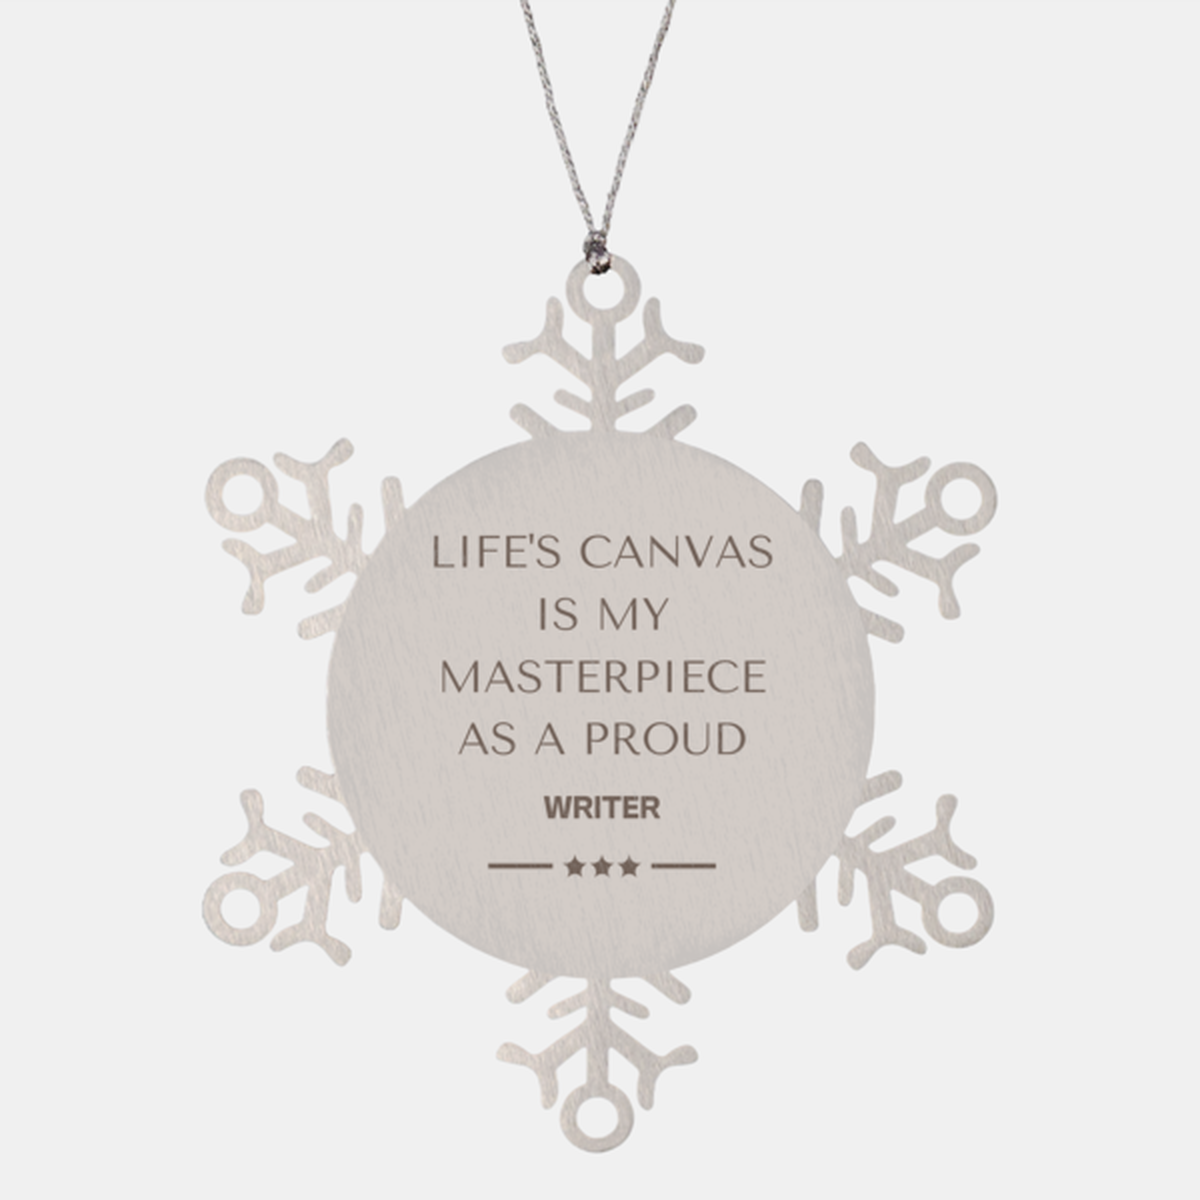 Proud Writer Gifts, Life's canvas is my masterpiece, Epic Birthday Christmas Unique Snowflake Ornament For Writer, Coworkers, Men, Women, Friends